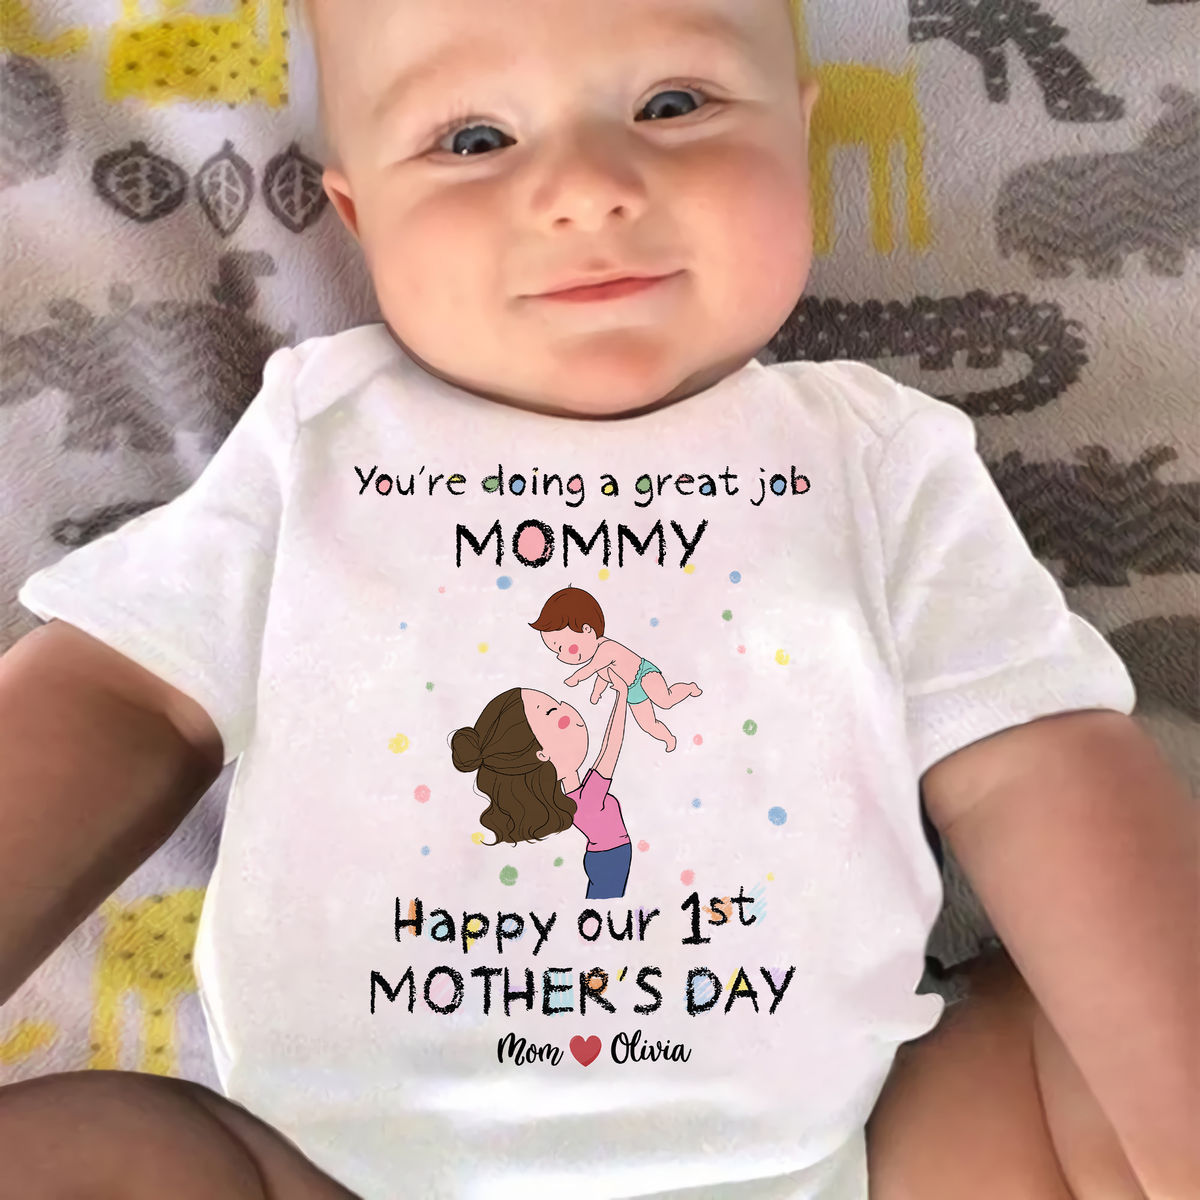 Personalized Shirt - Custom Baby Onesies - You're doing a great job Mommy - Happy our 1st Mother's Day (27868)